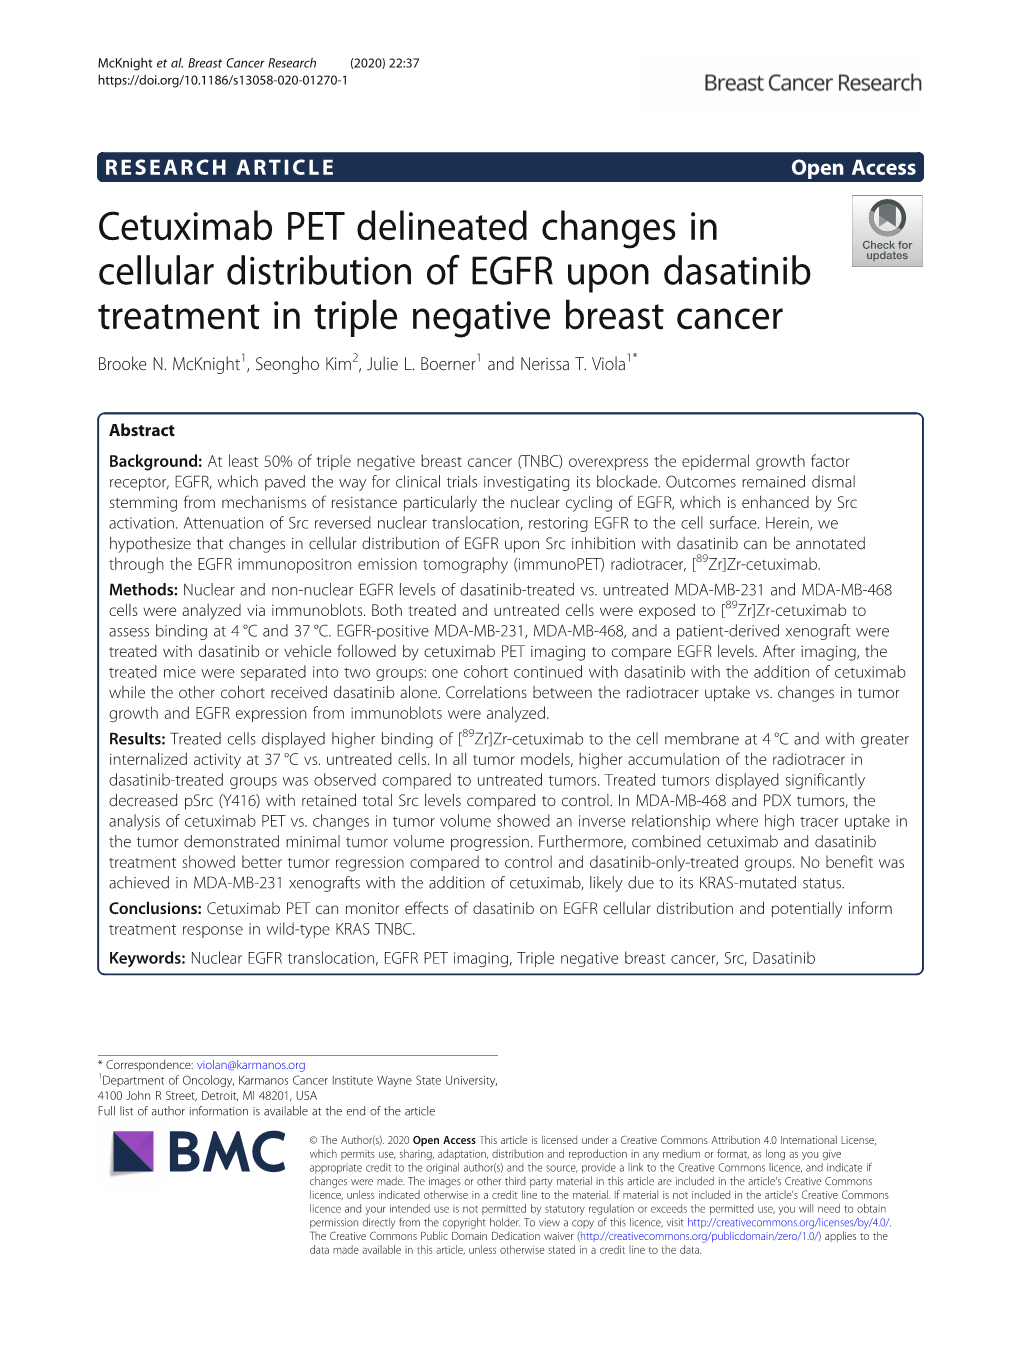 Cetuximab PET Delineated Changes in Cellular Distribution of EGFR Upon Dasatinib Treatment in Triple Negative Breast Cancer Brooke N